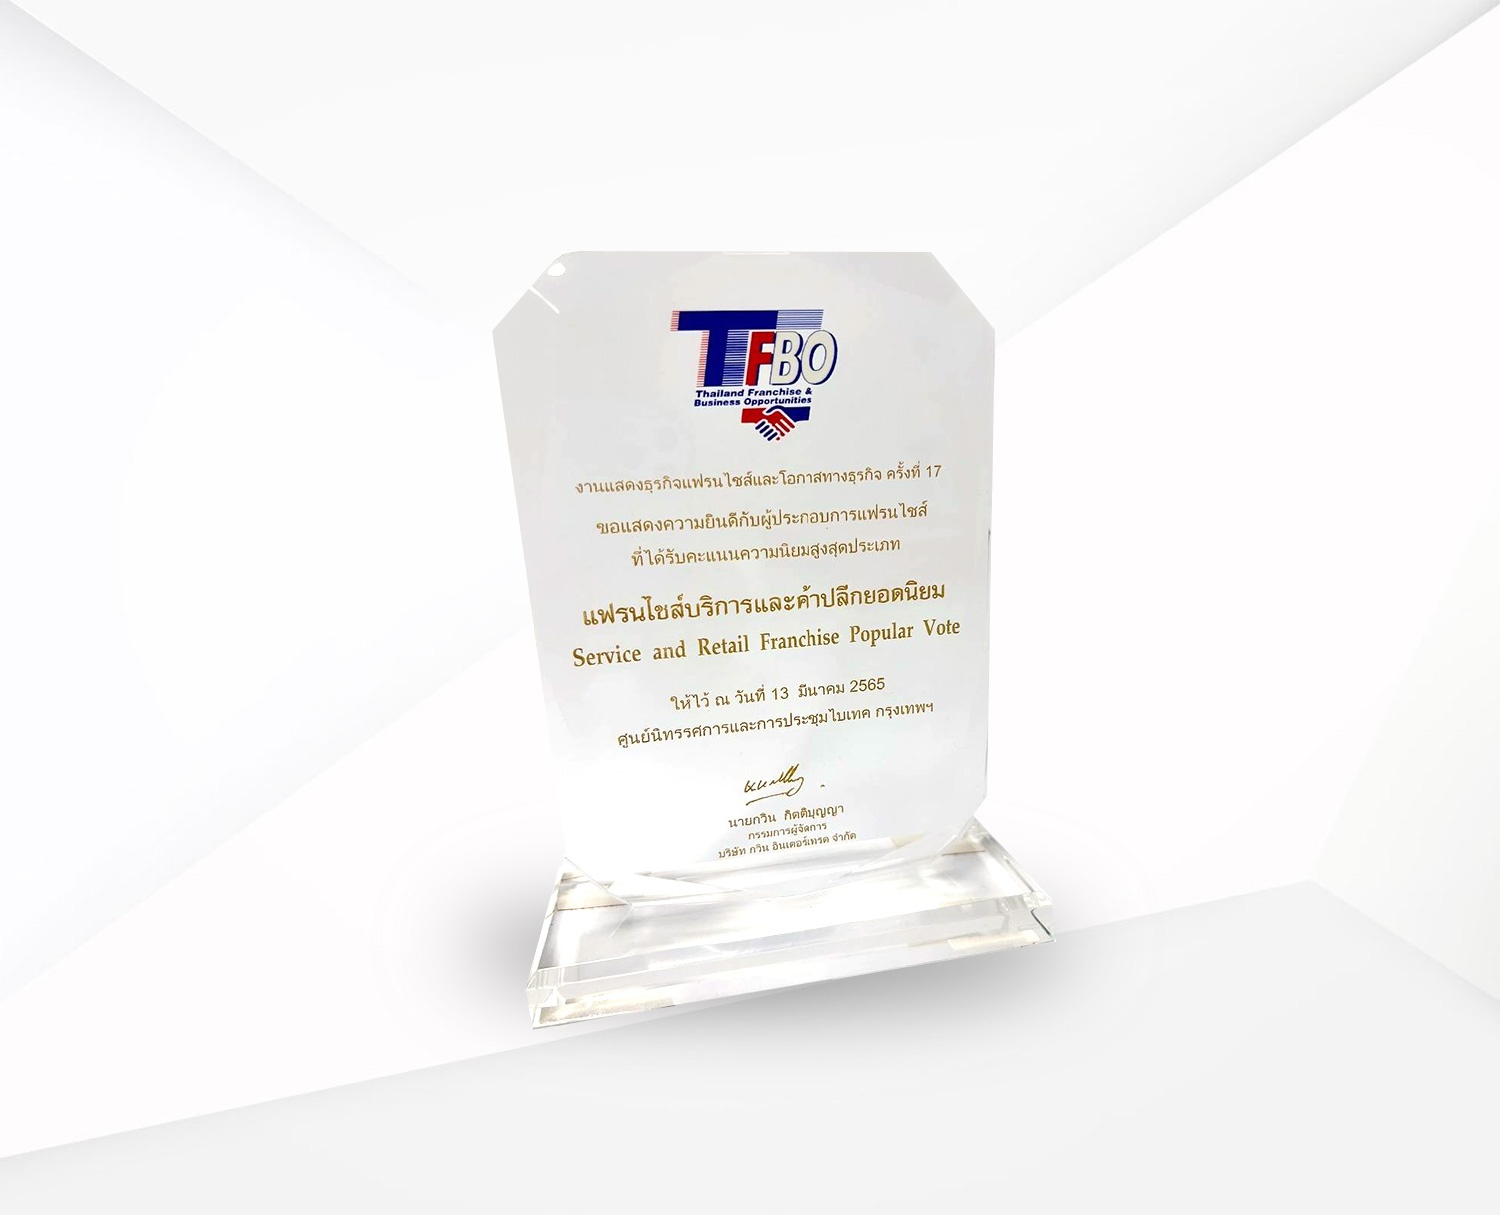 OfficeMate Plus + wins the “Service & Retail Franchise Popular Vote” award